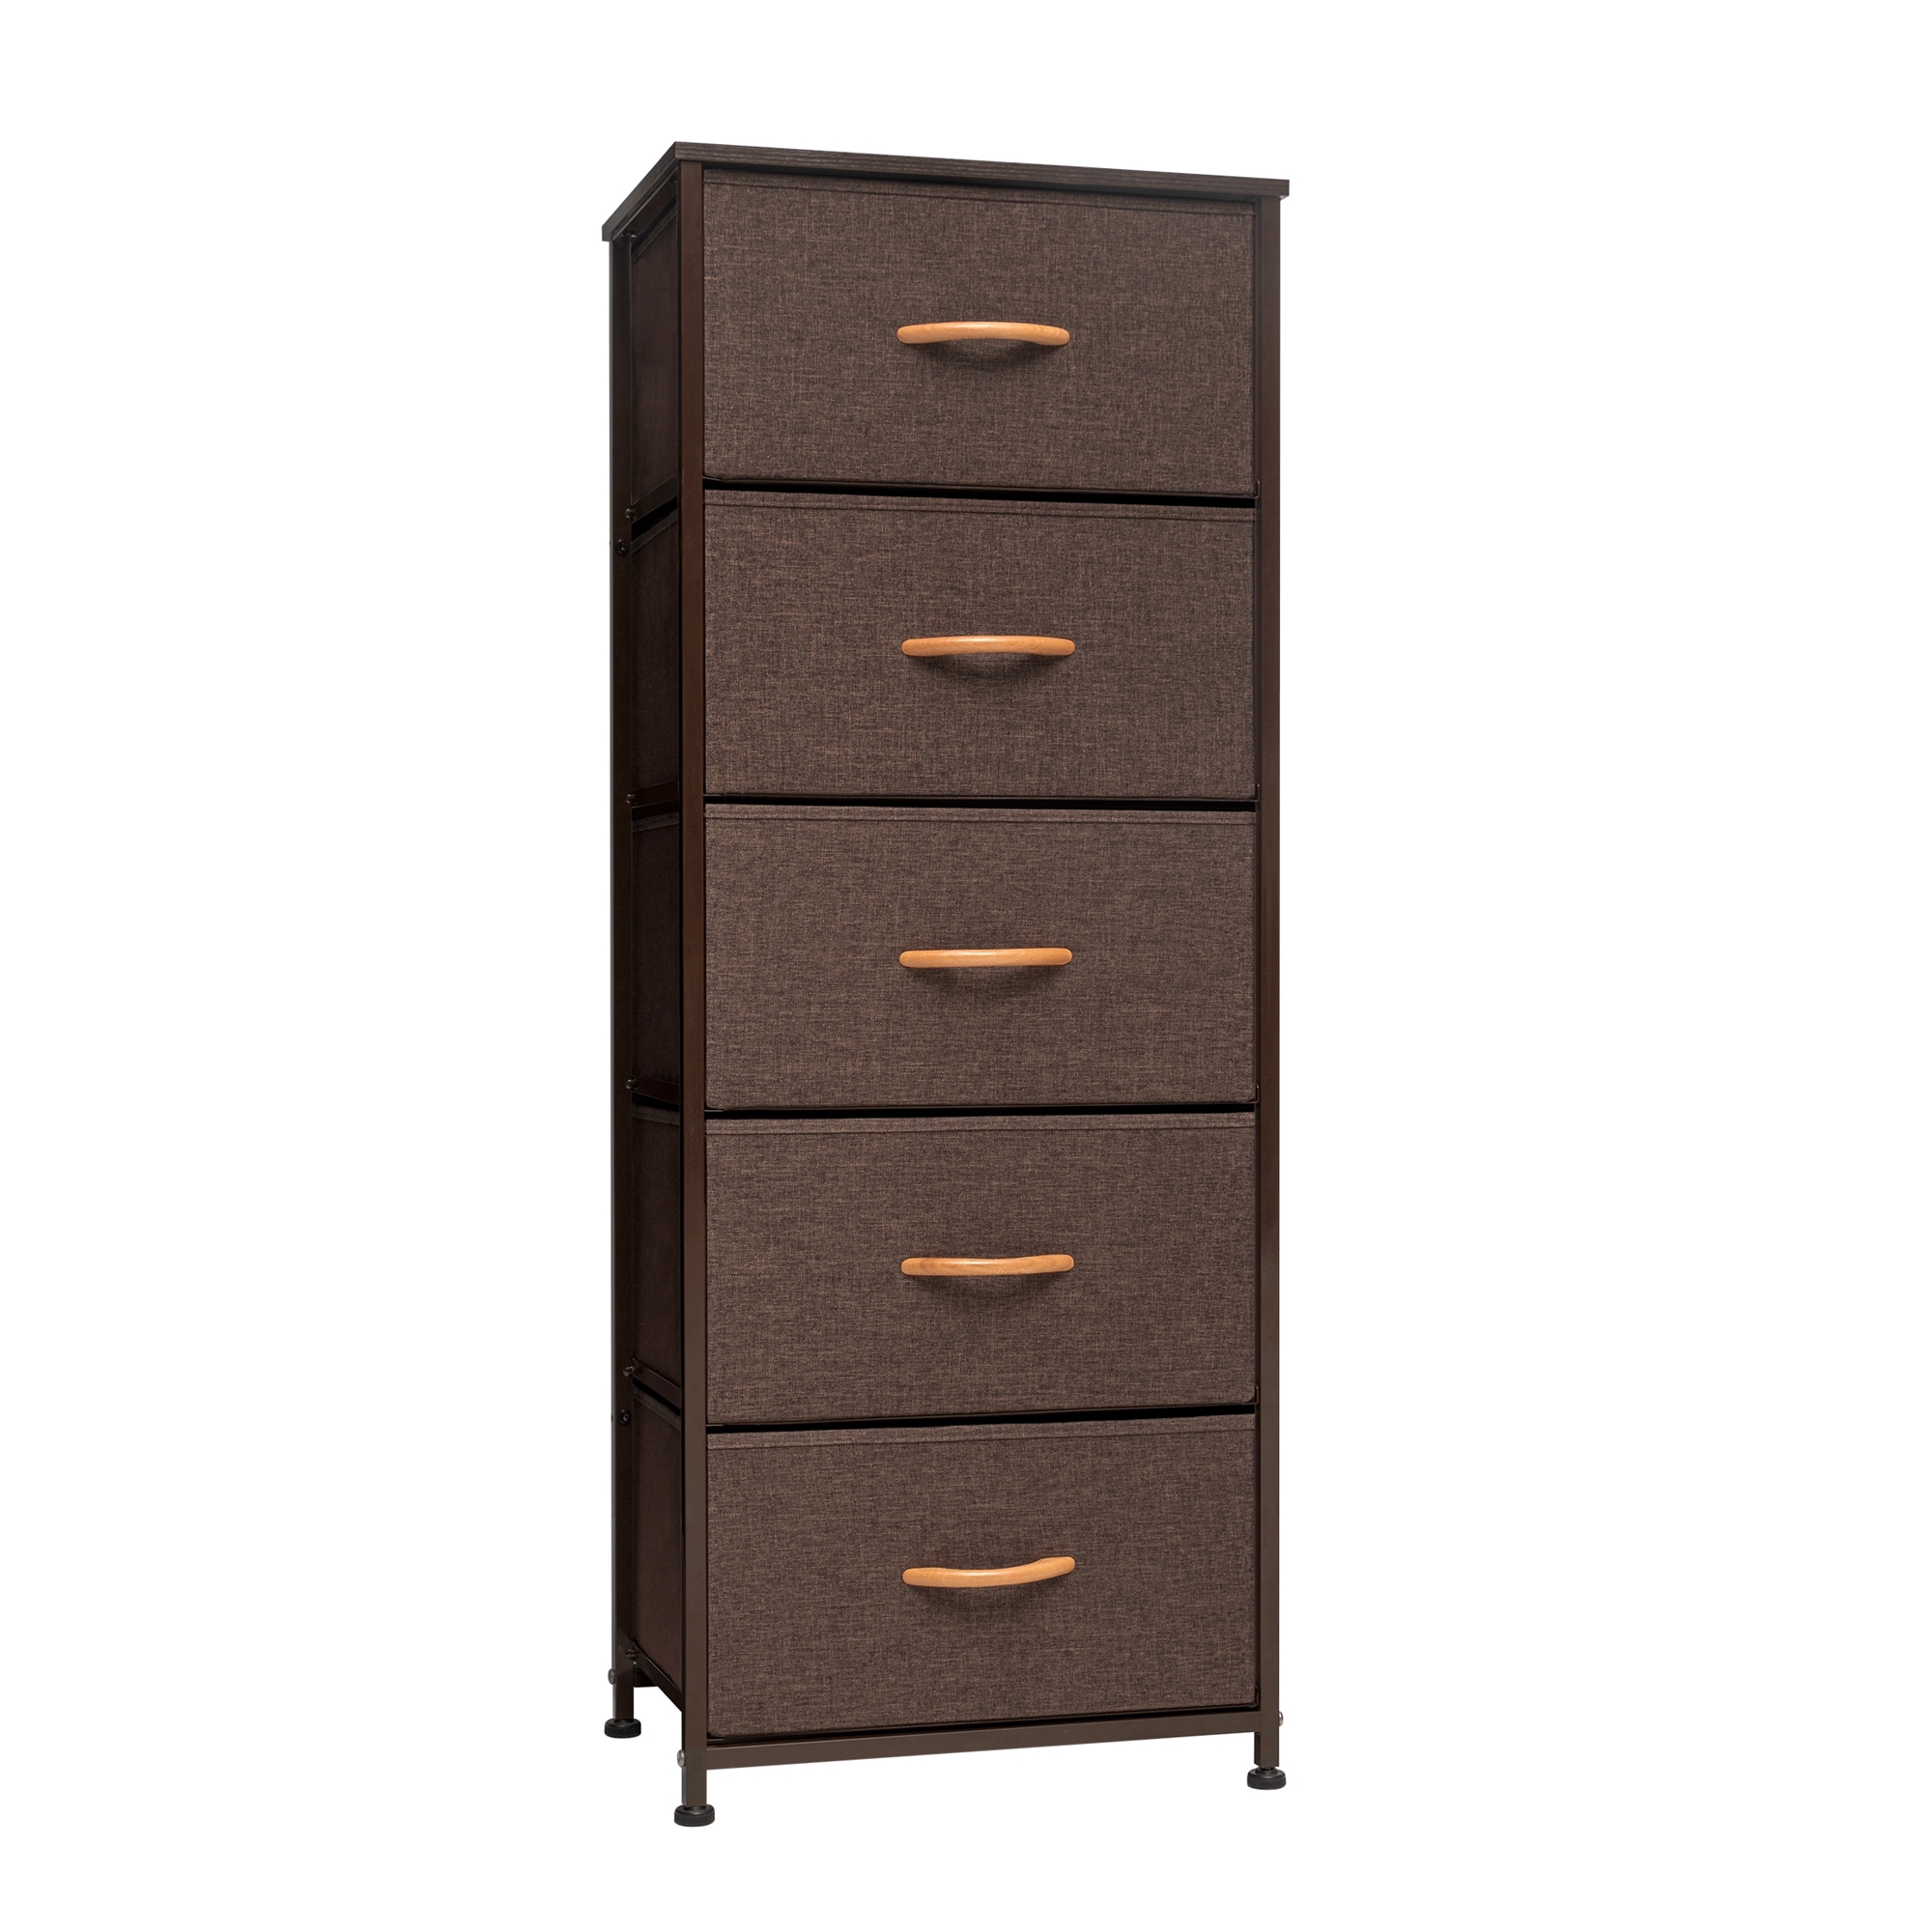 Home Dresser Storage Chest Tower 7 Fabric Drawers Metal Frame Organizer Cabinet for sale online 